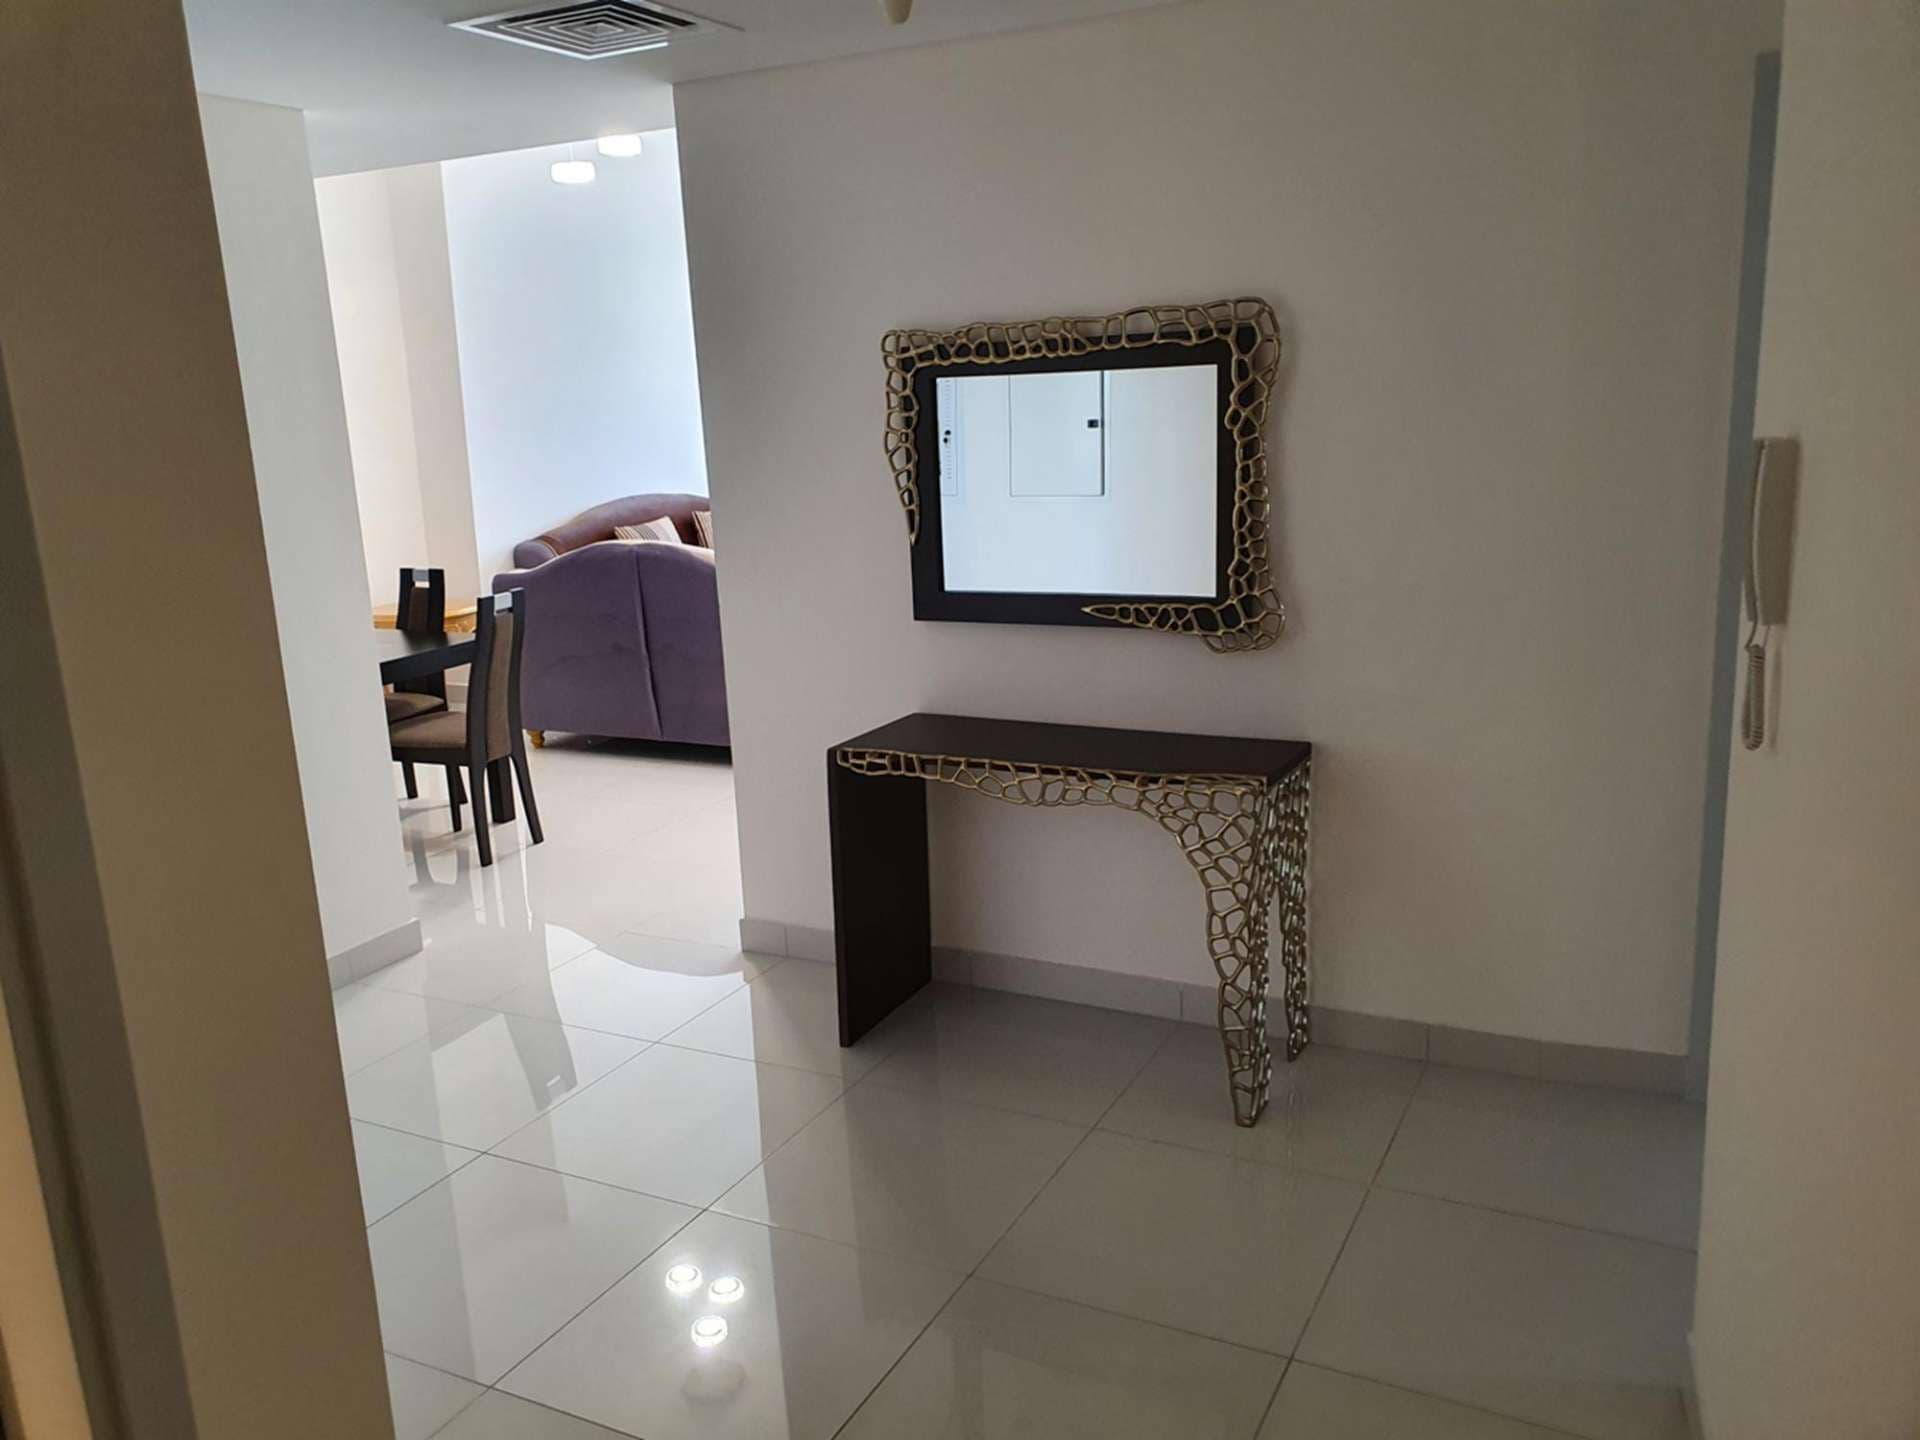 2 Bedroom Apartment For Rent Damac Heights Lp04971 14272f63bf3a1a00.jpg